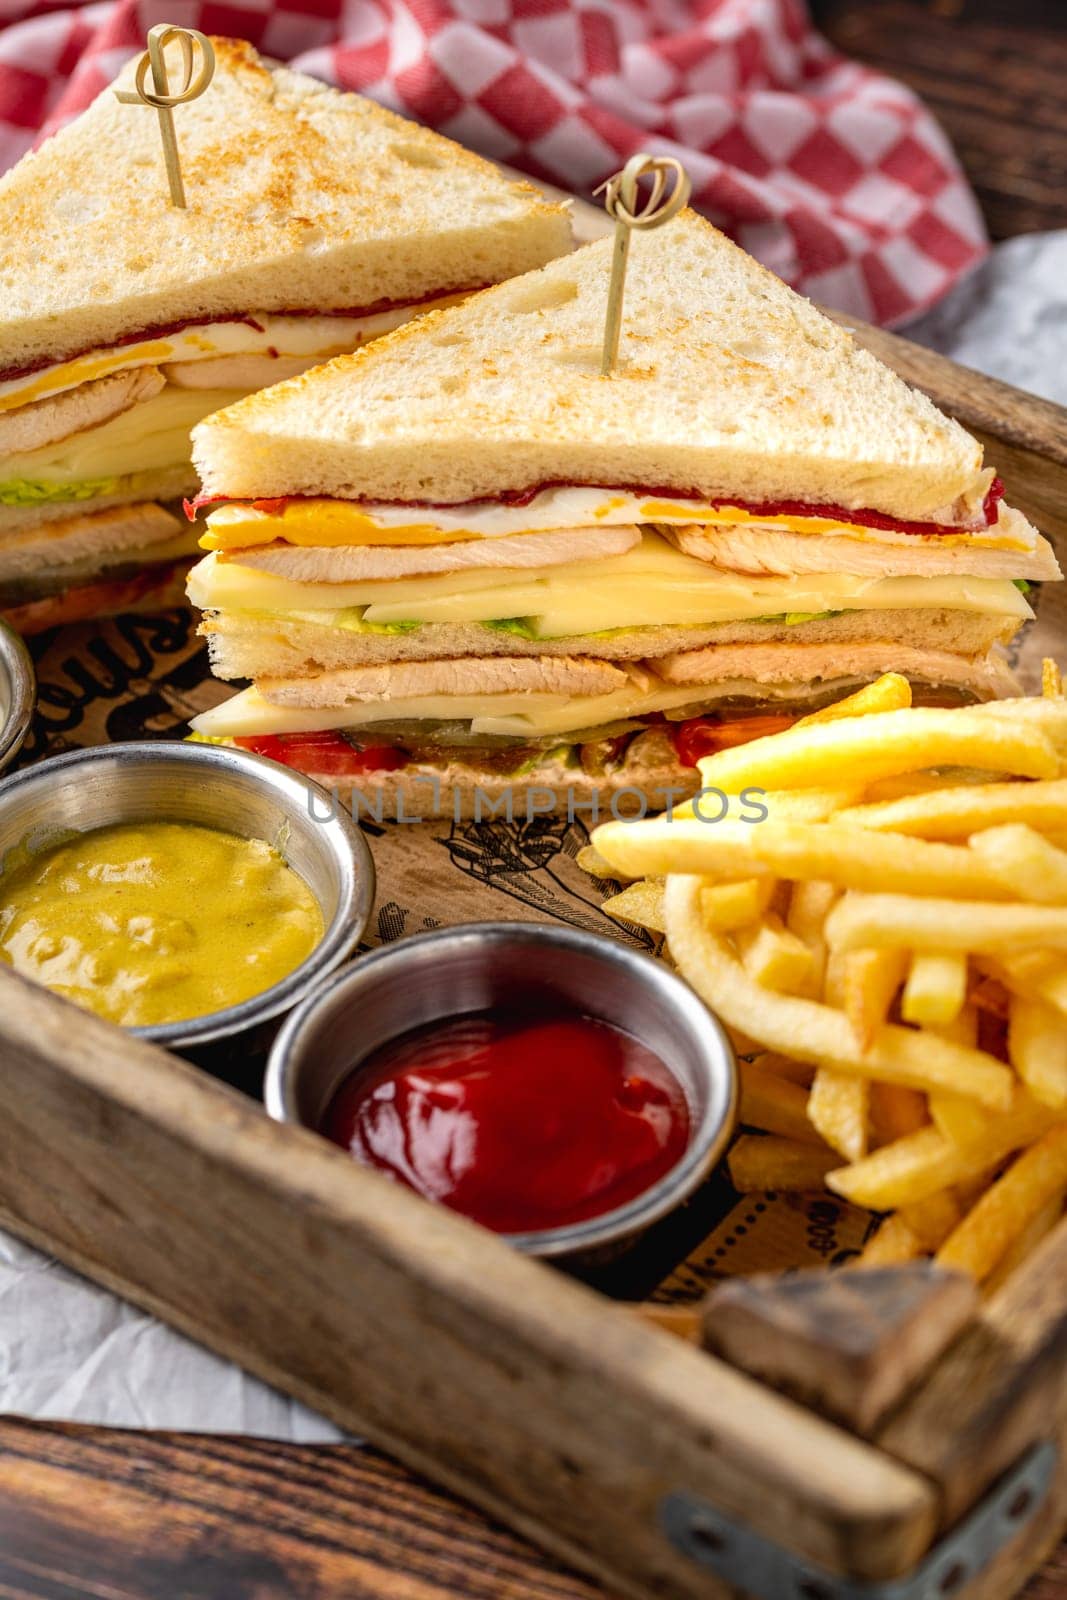 Chicken club sandwich with fries, ketchup, mustard and mayonnaise